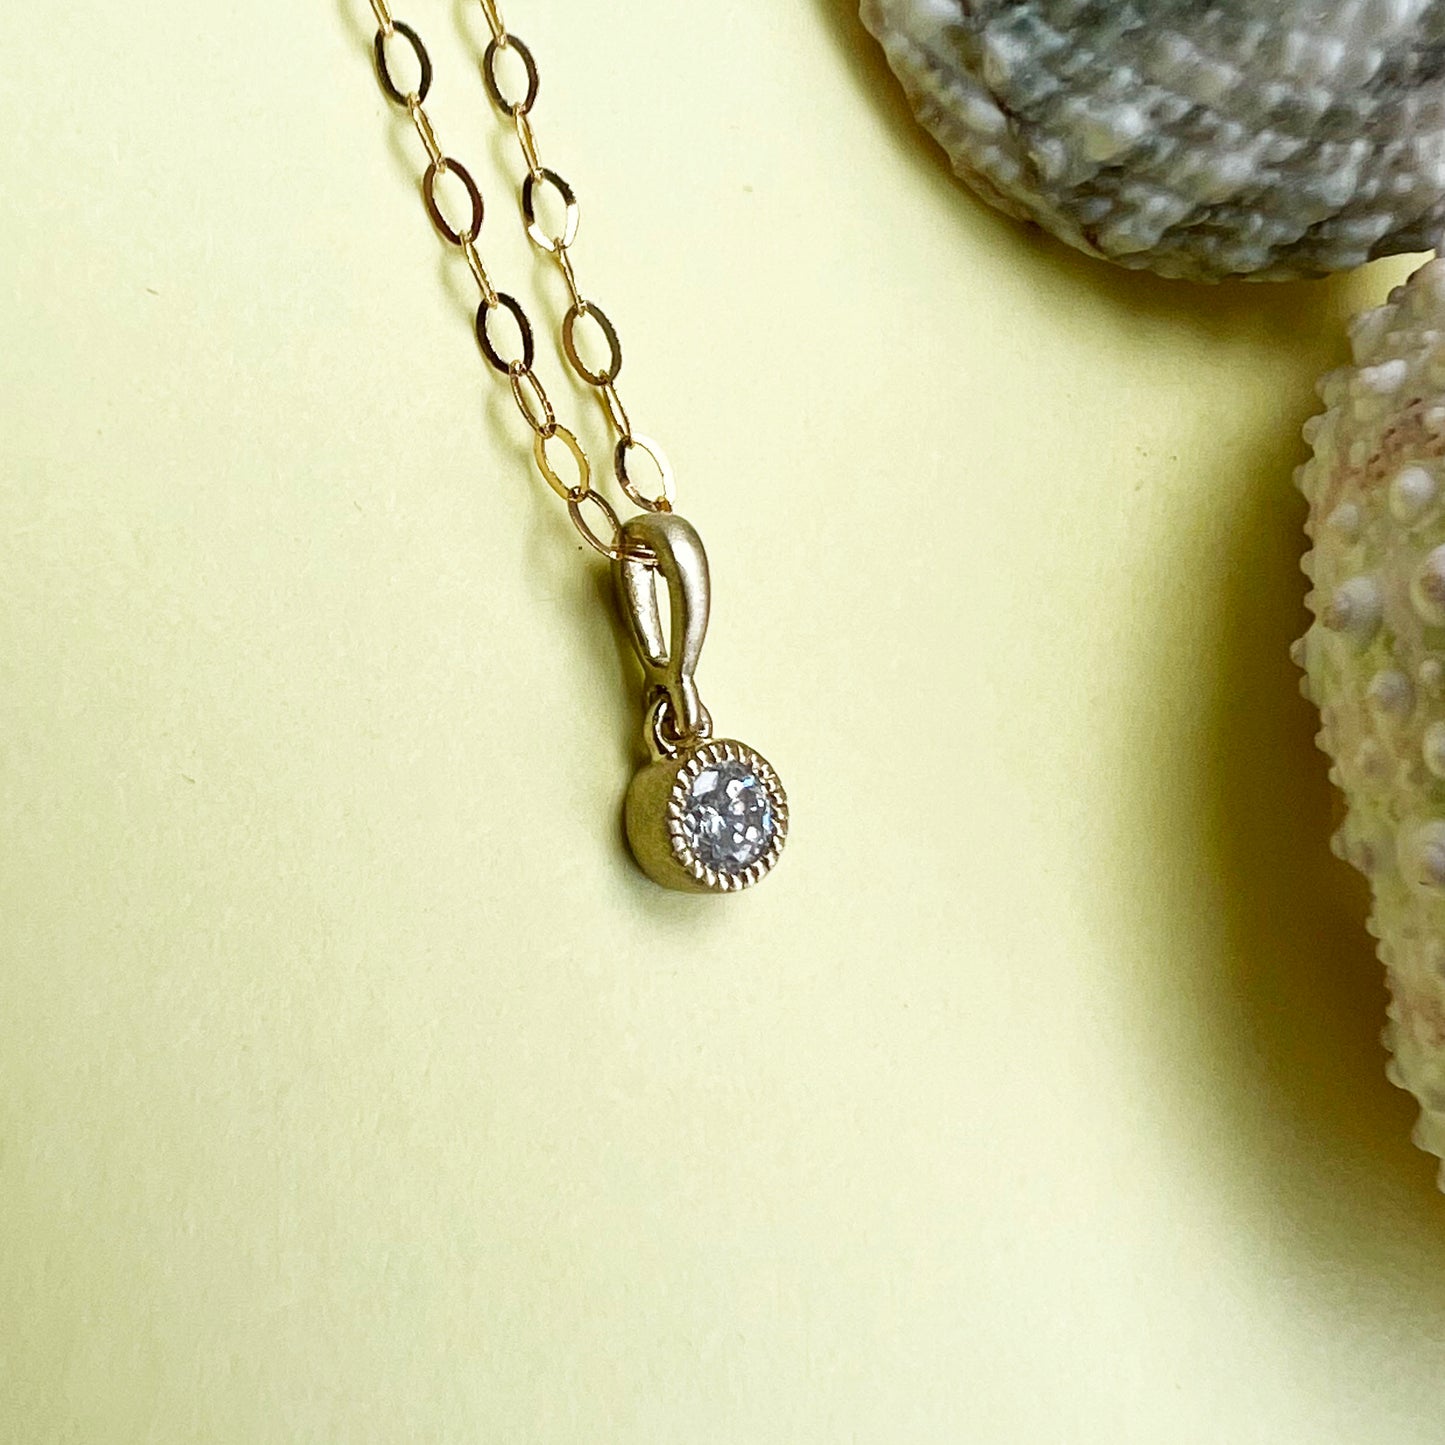 delicate diamond necklace, 9ct gold diamond necklace, 18inch 9ct gold chain, millgrain detail, 9ct gold necklace